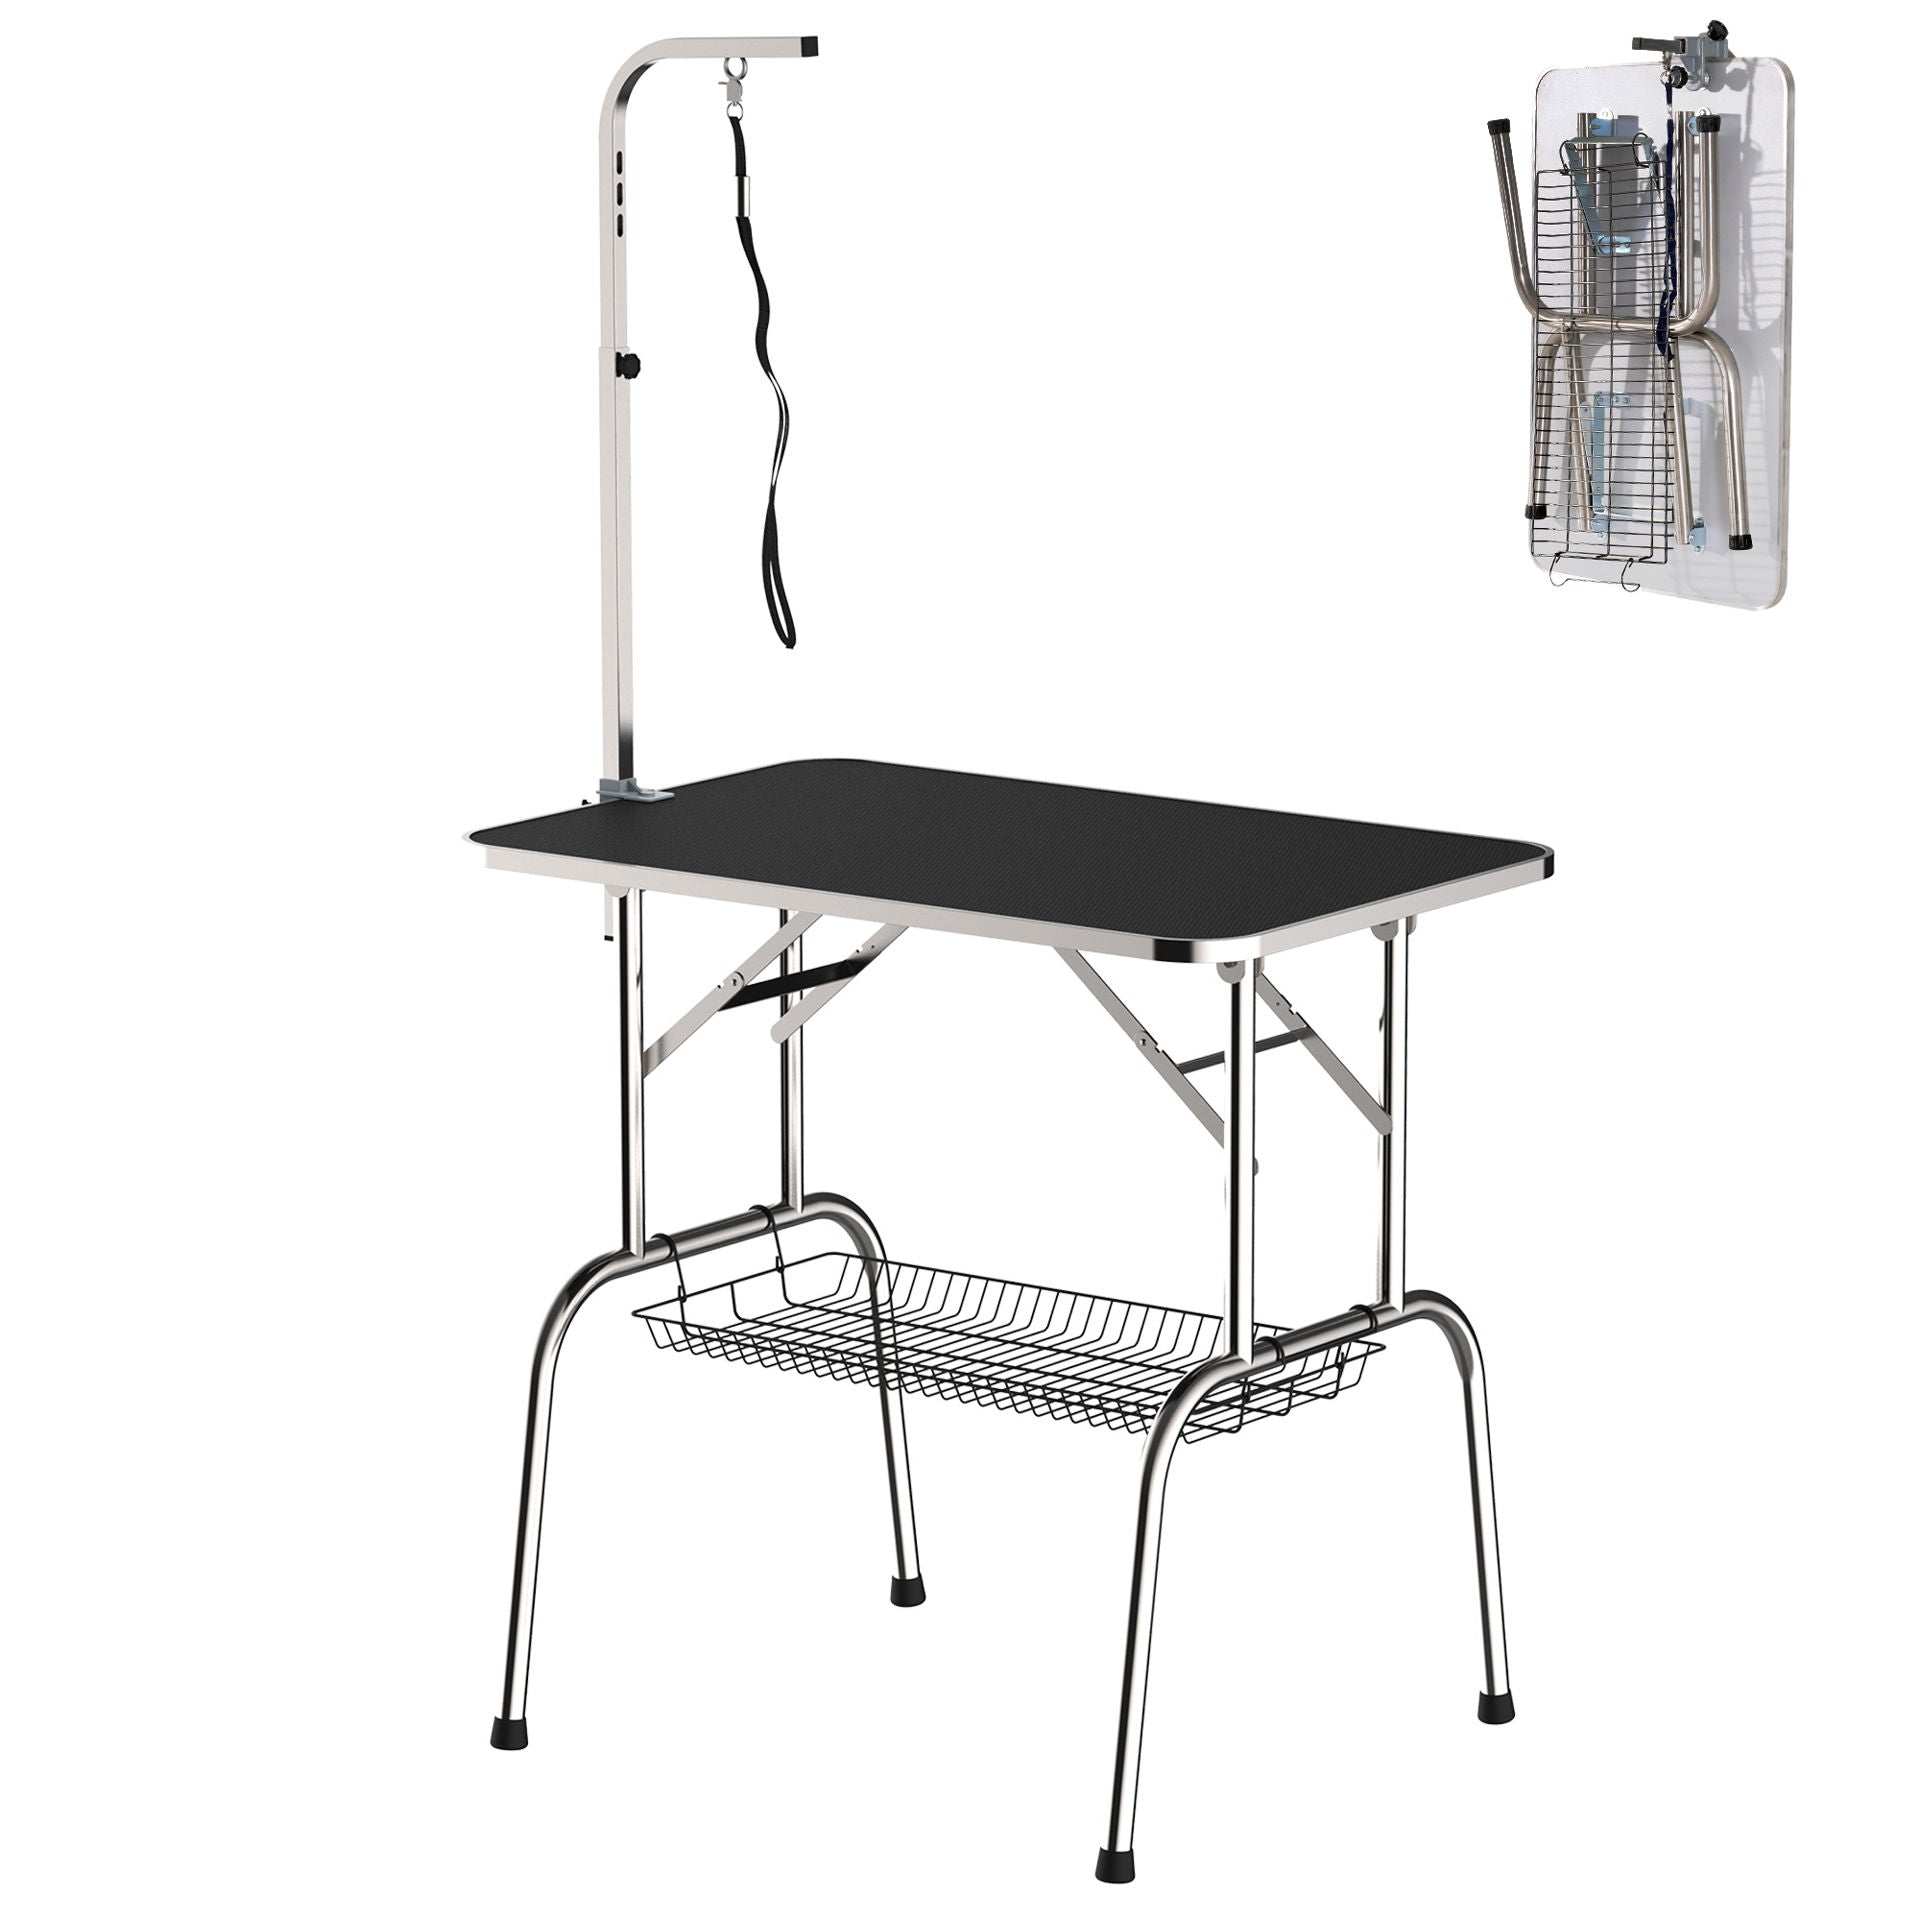 Nancy's The Hill Dog Grooming Table - Zwart - Rubber, Staal - 35,43 cm x 23,62 cm x 29,53 cm